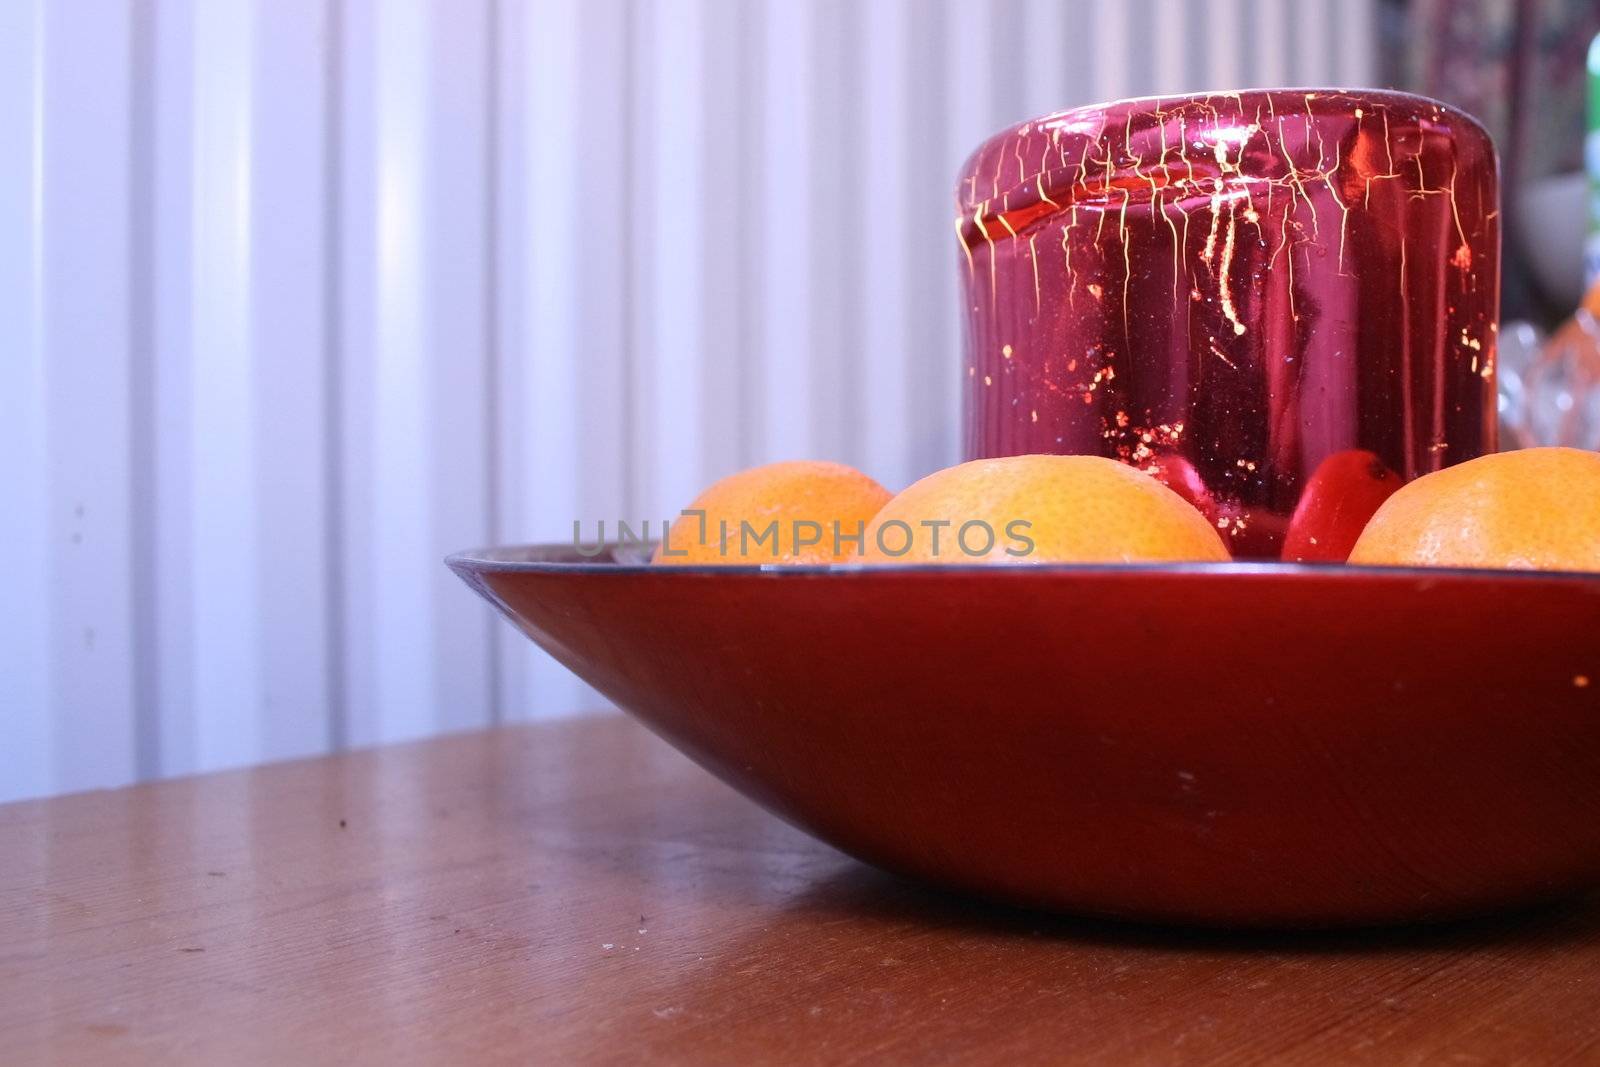 festive candle and clementines in a red glass bowl